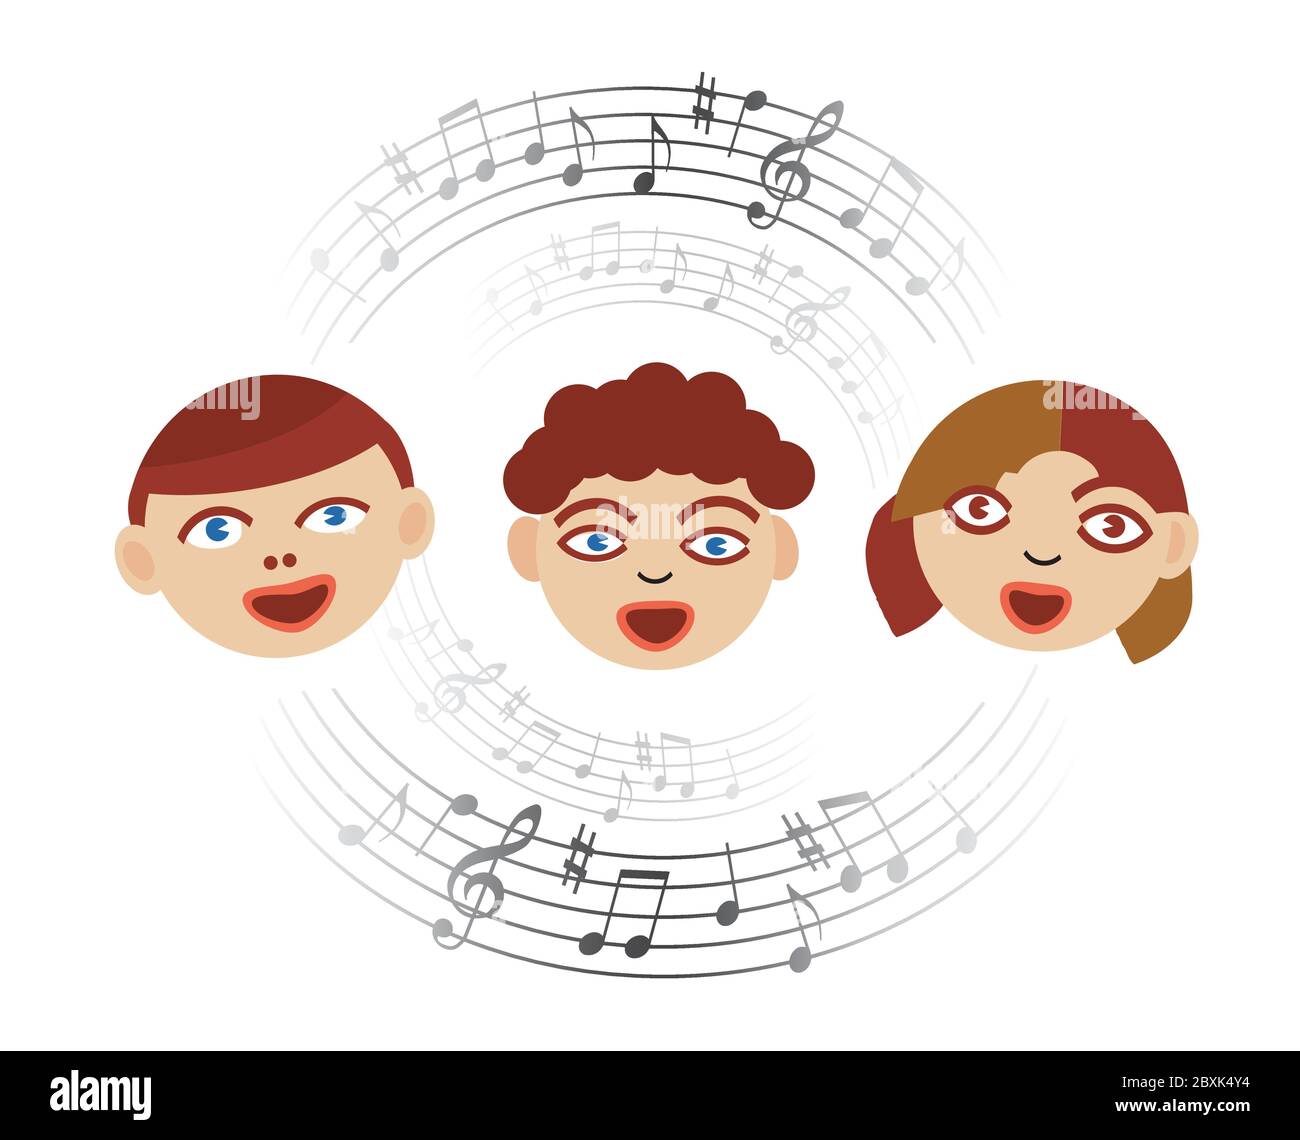 Three Singing children with musical notes. Stylized Illustration of Children's Choir with circle of musical notes. Isolated on white background. Stock Vector